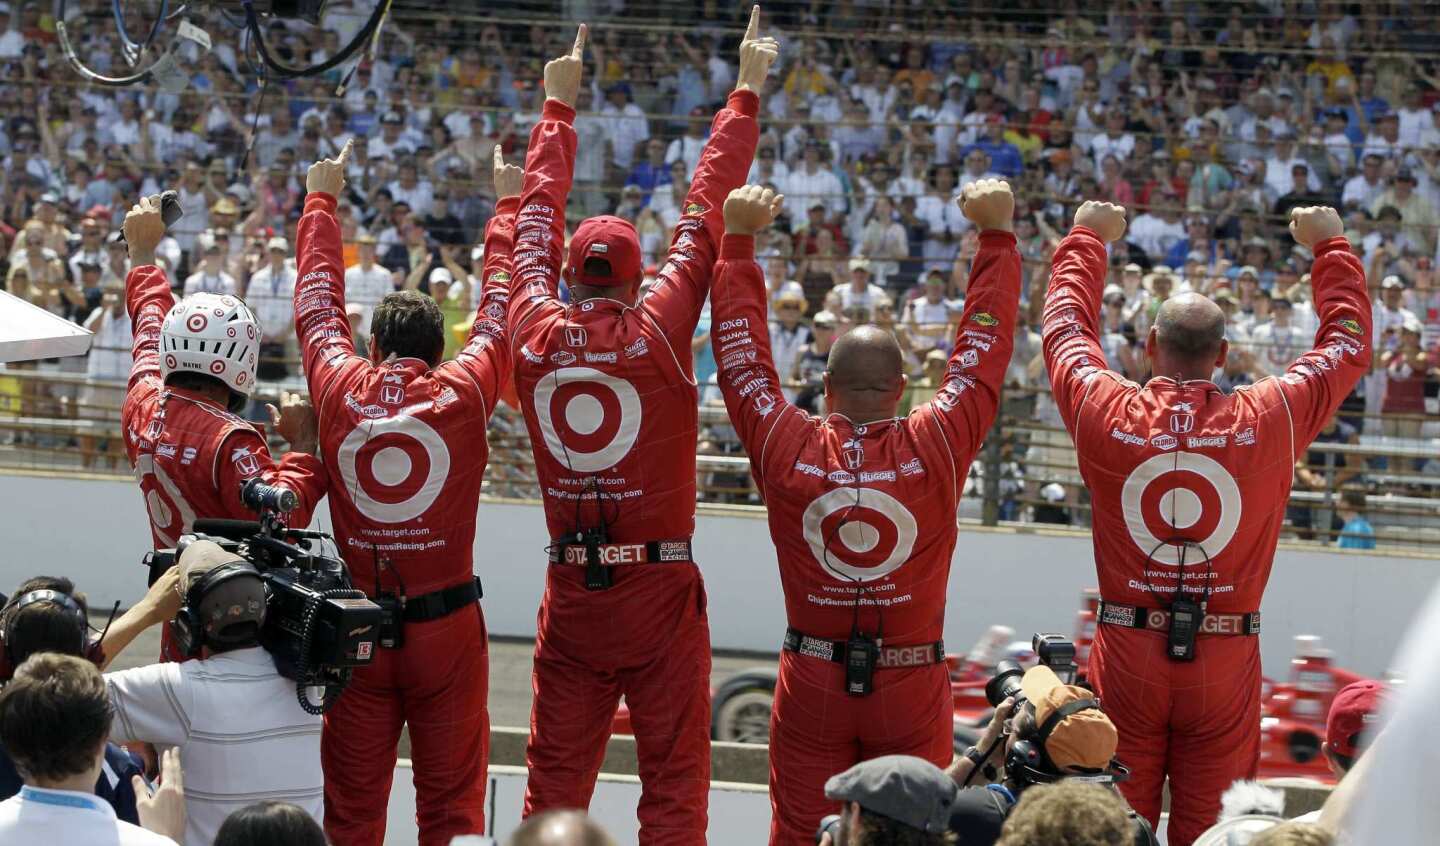 Crew members of driver Dario Franchitti celebrate as he wins the Indianapolis 500 on Sunday.